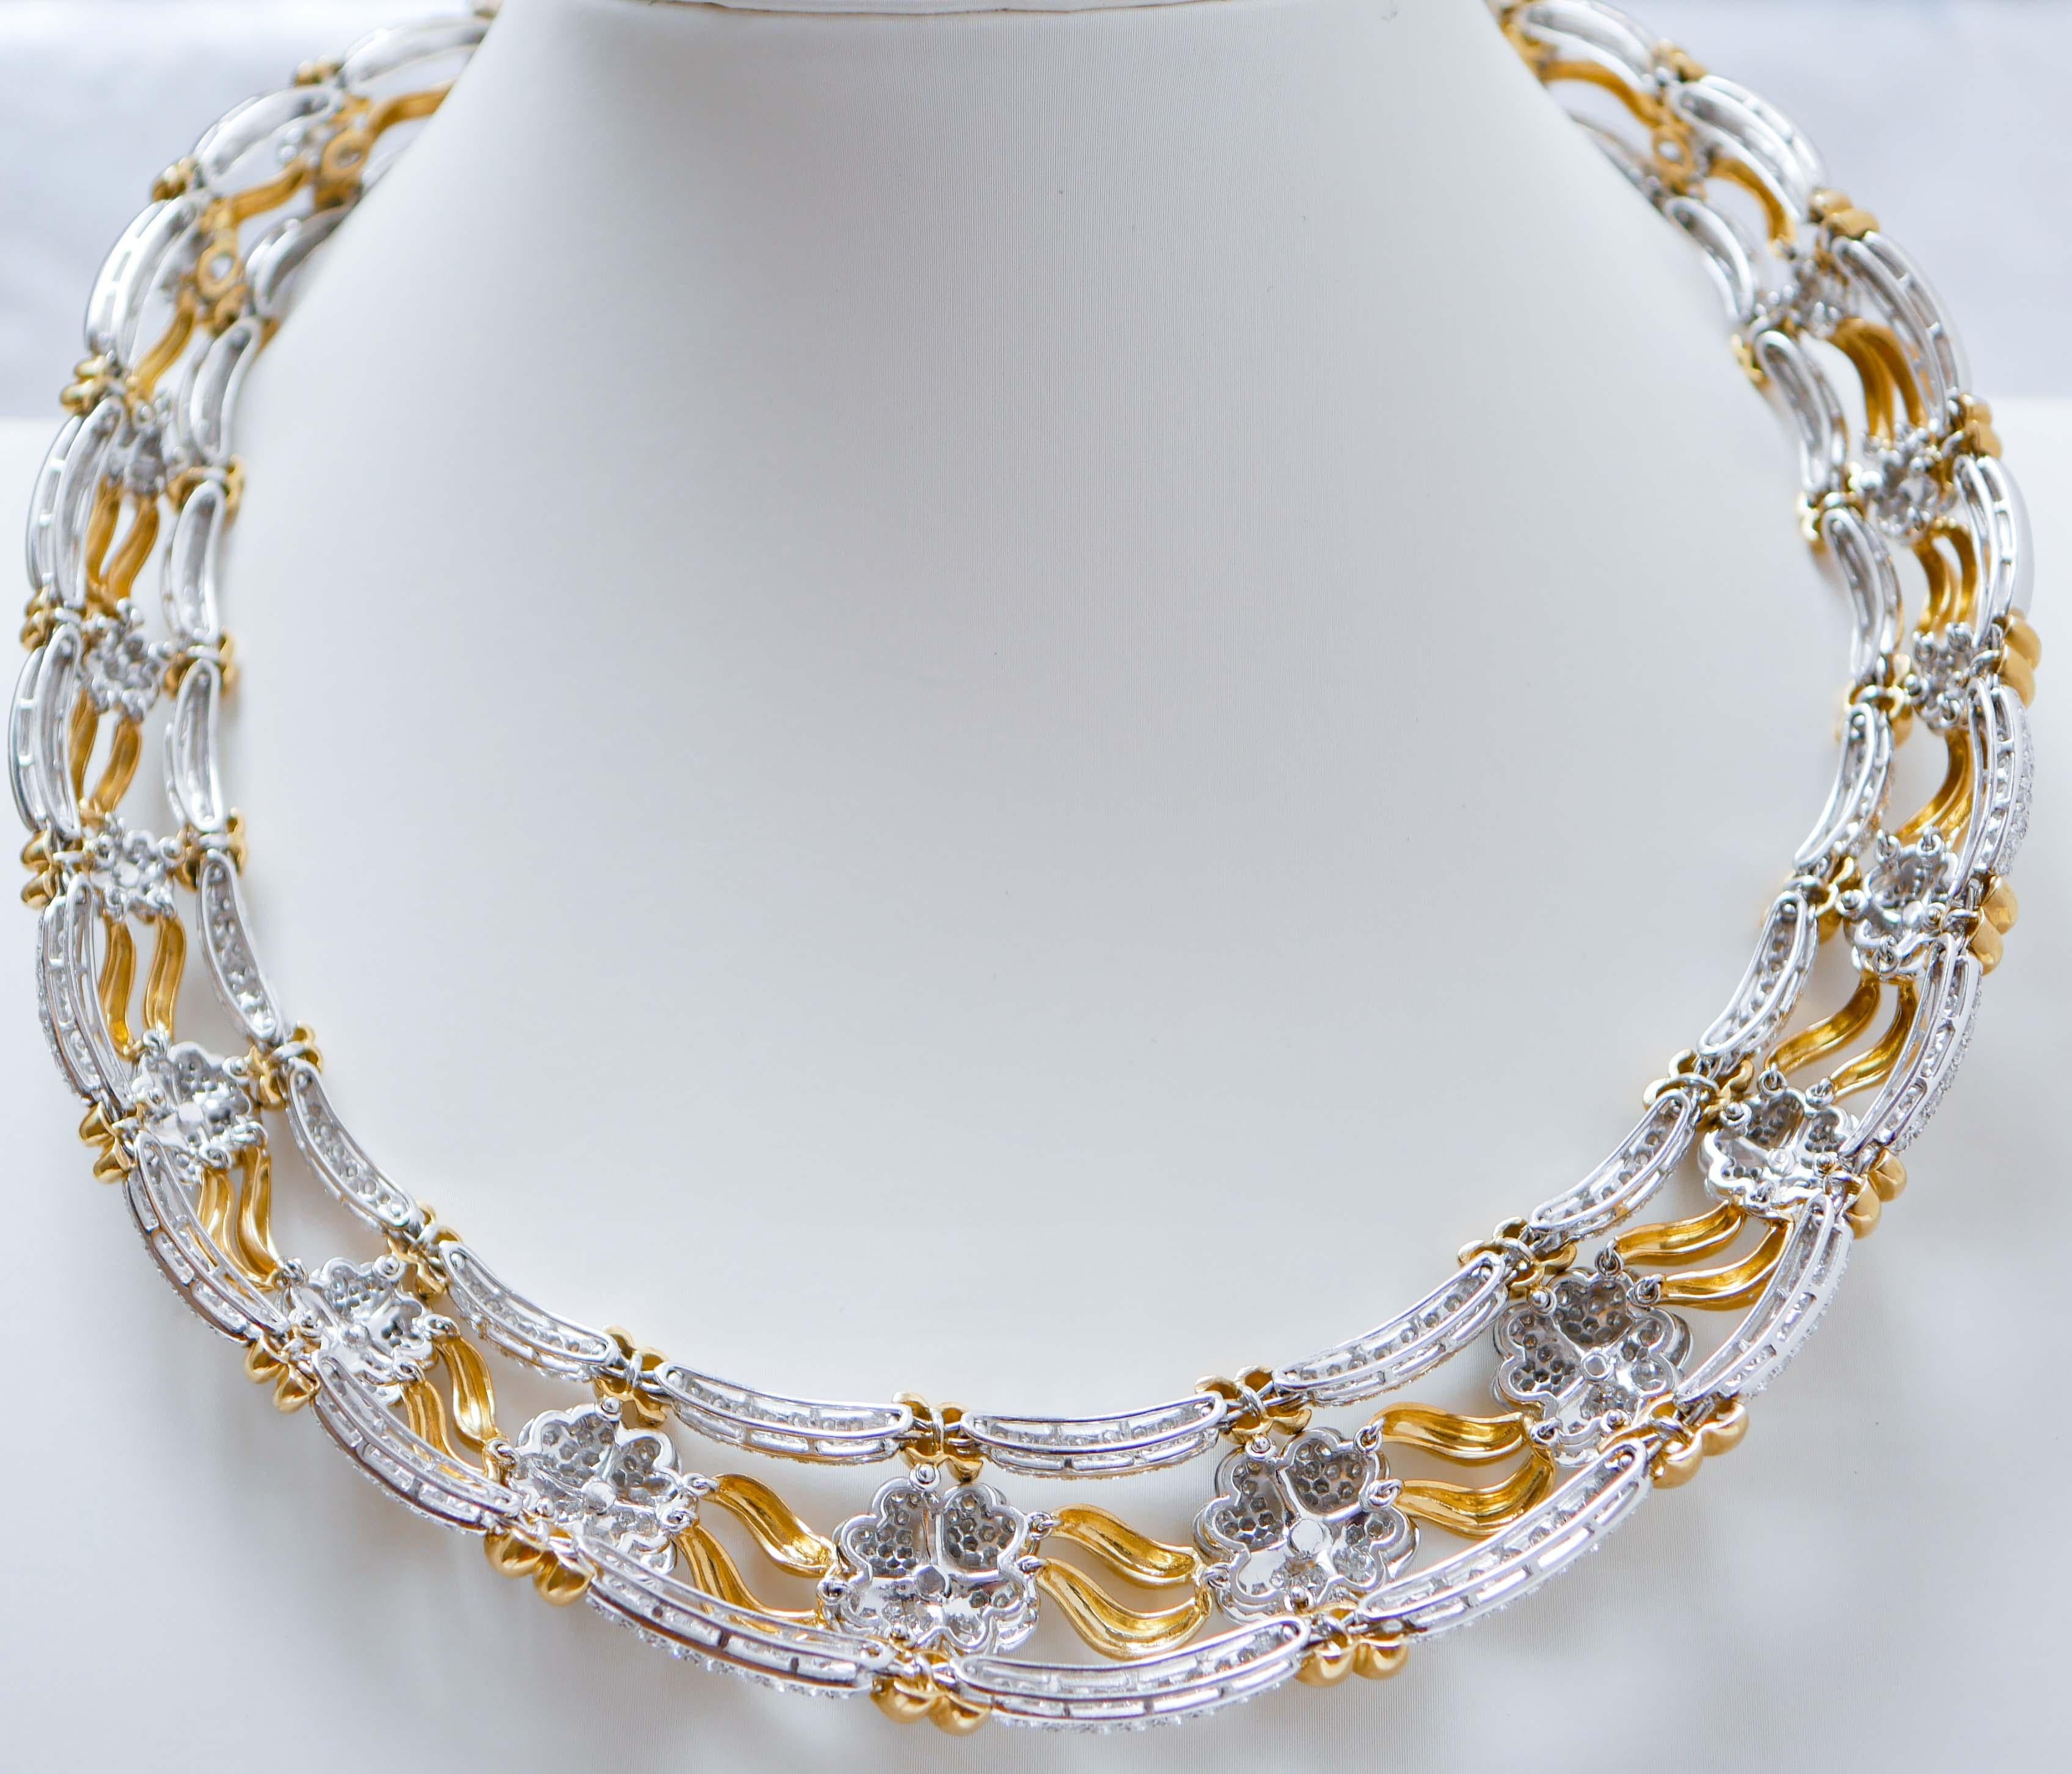 Retro Diamonds, 18 Karat Yellow Gold and White Gold Necklace. For Sale